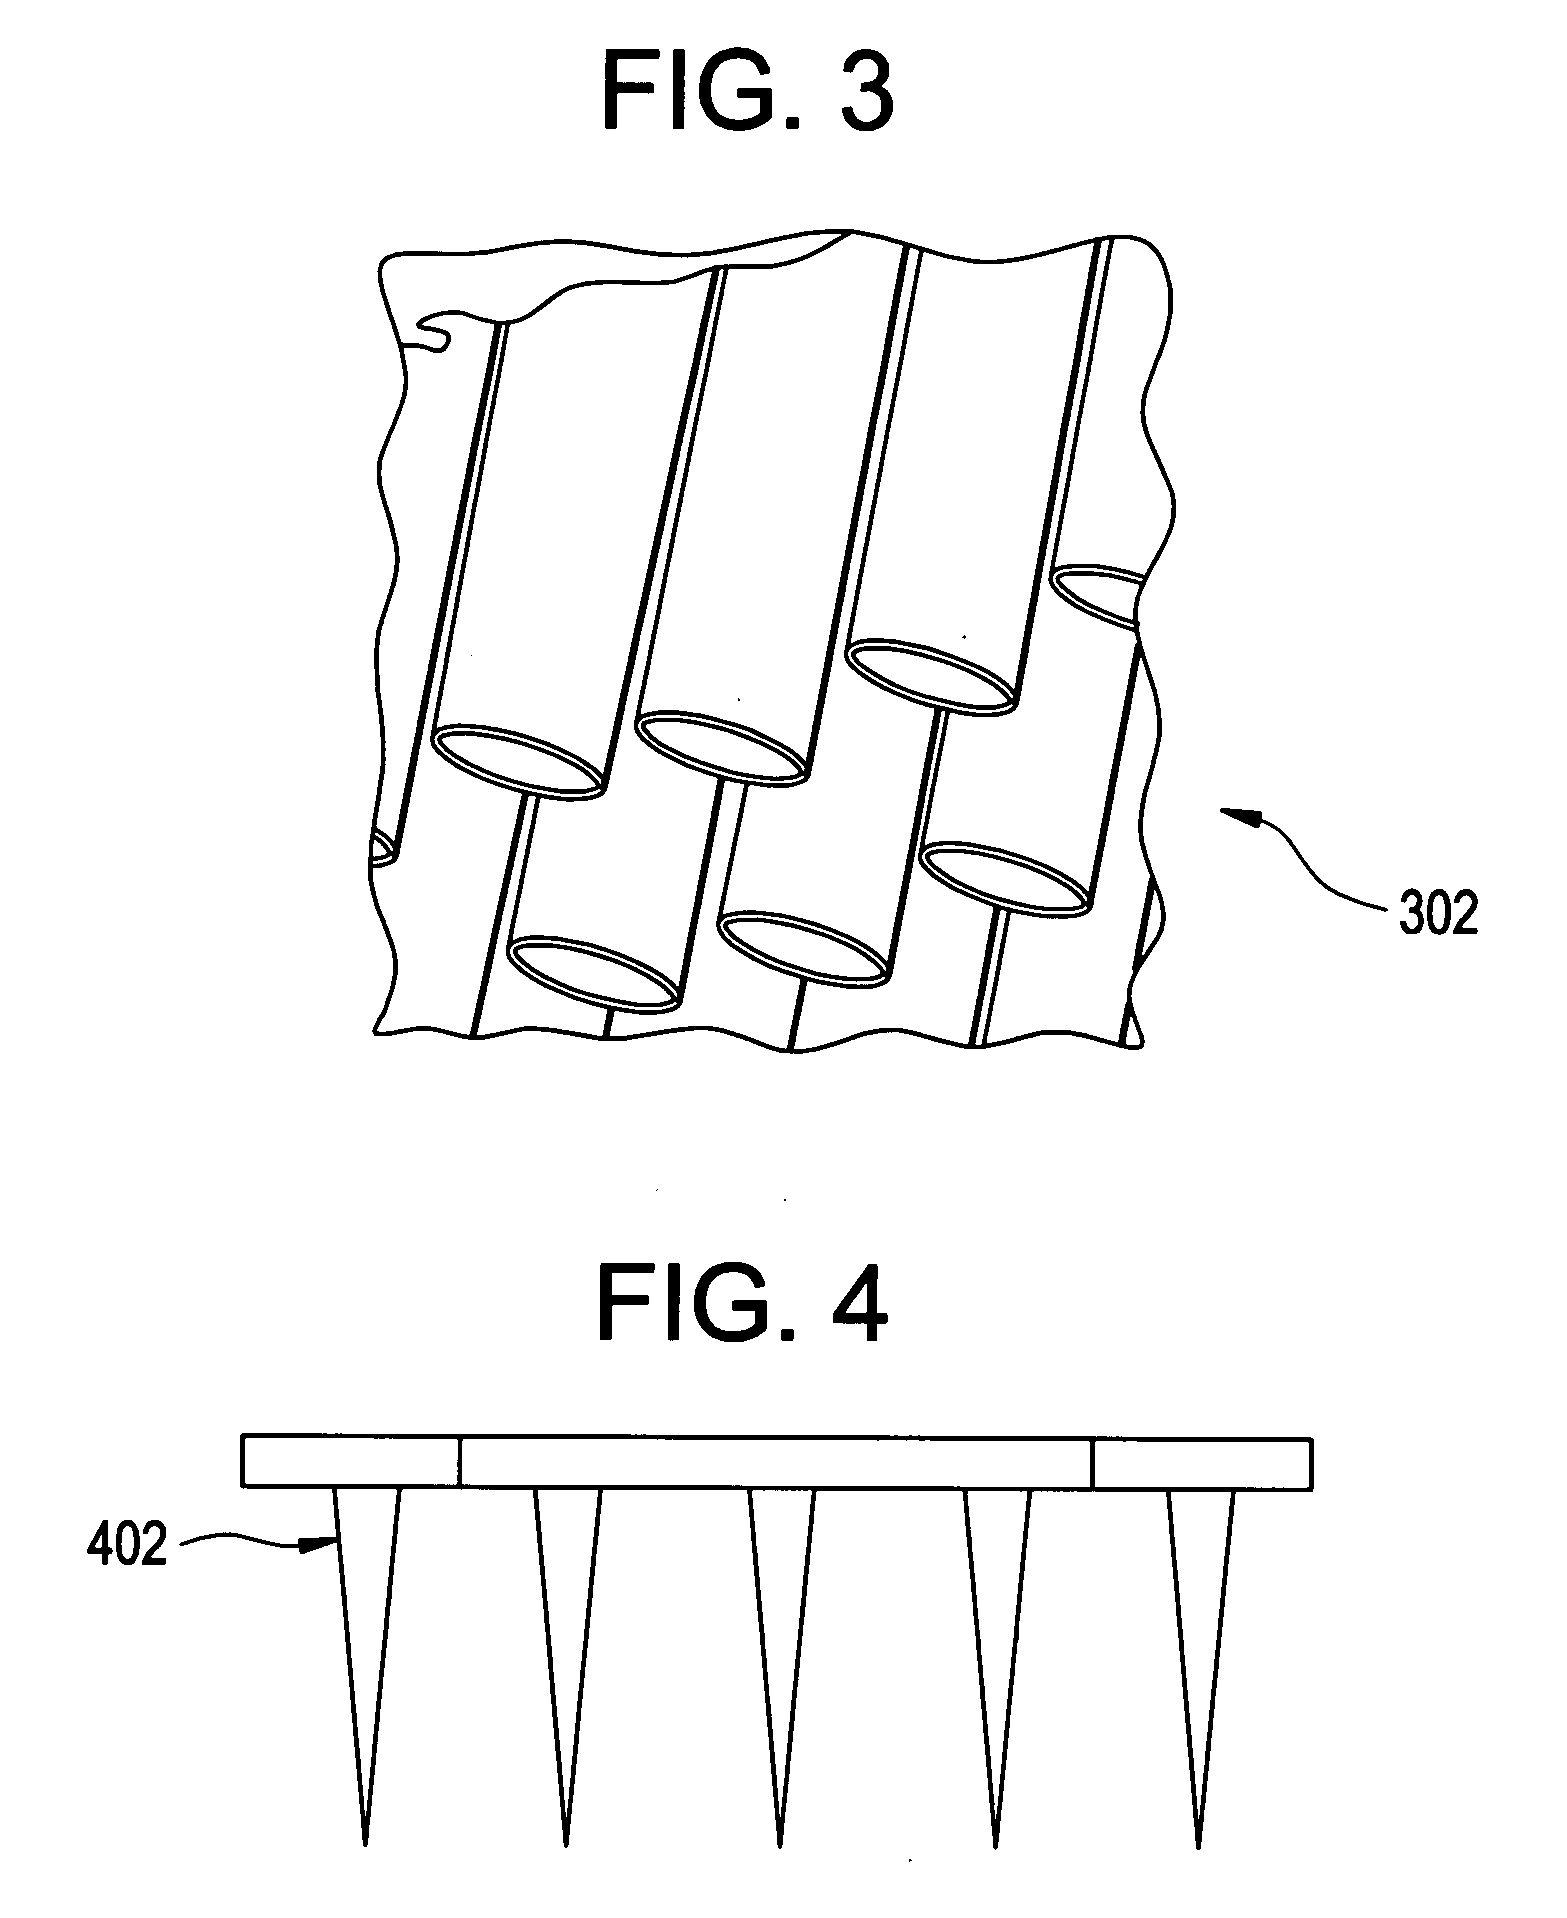 Systems and methods for enhancing gas and vapor transfer for tissue treatment devices